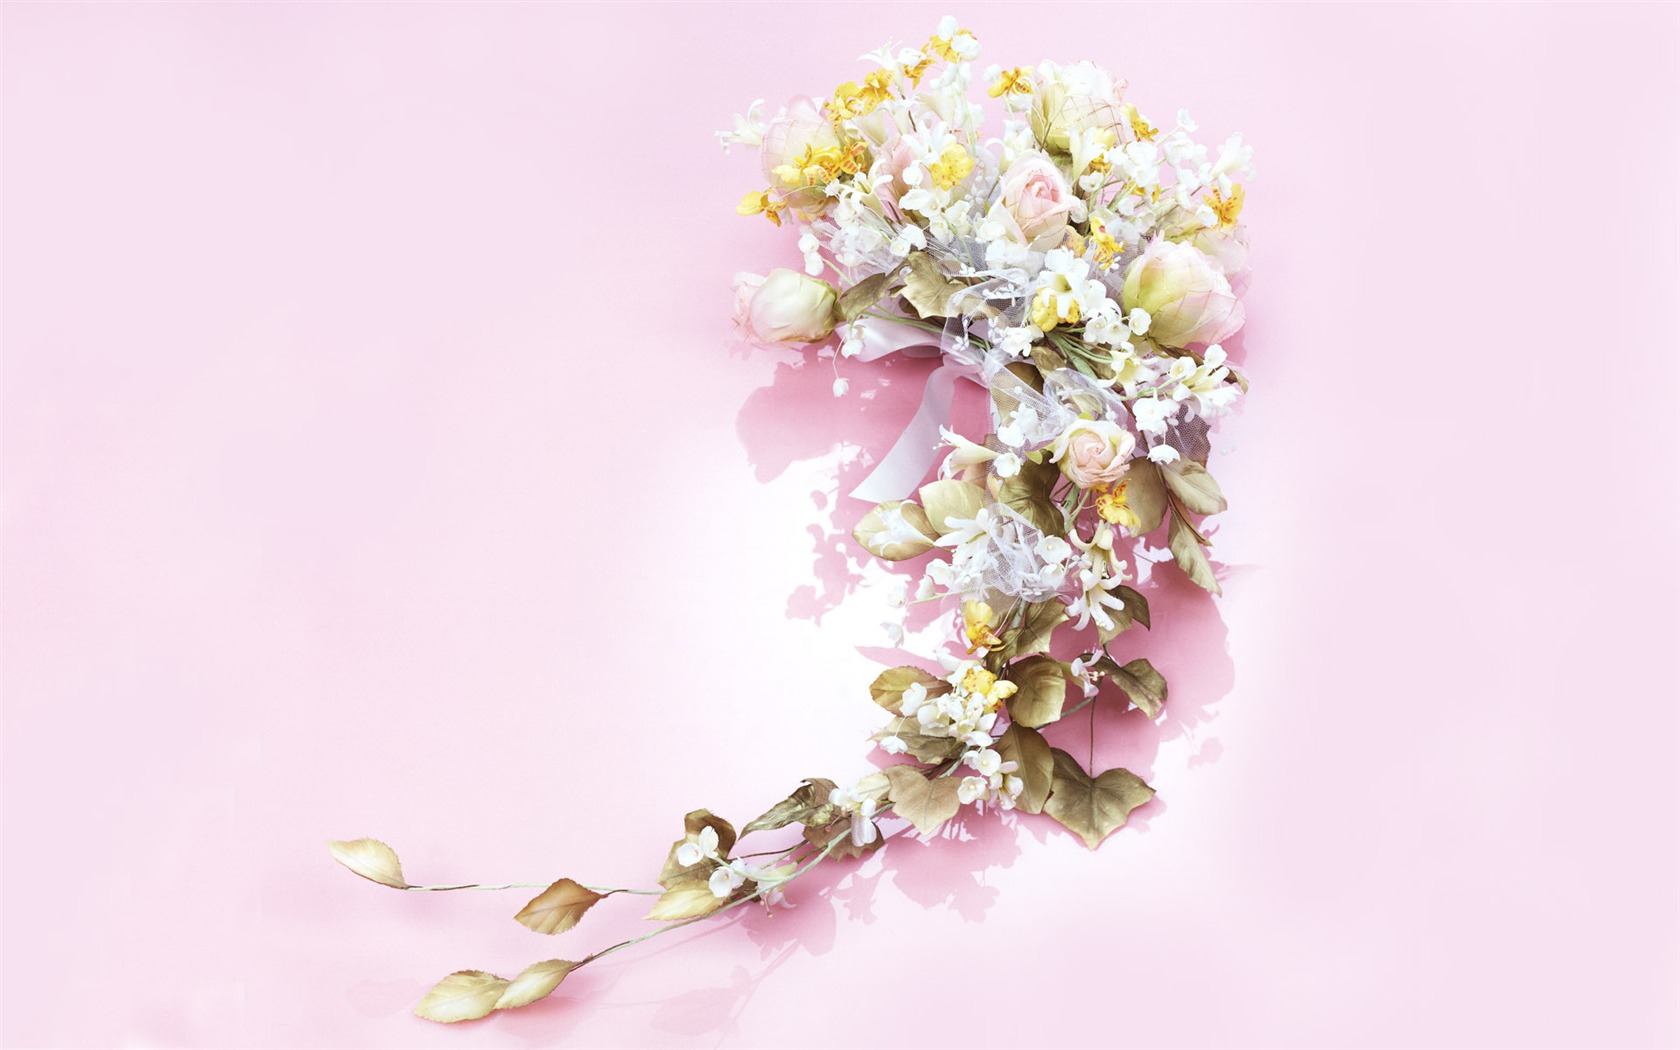 Wedding Flowers items wallpapers (2) #6 - 1680x1050